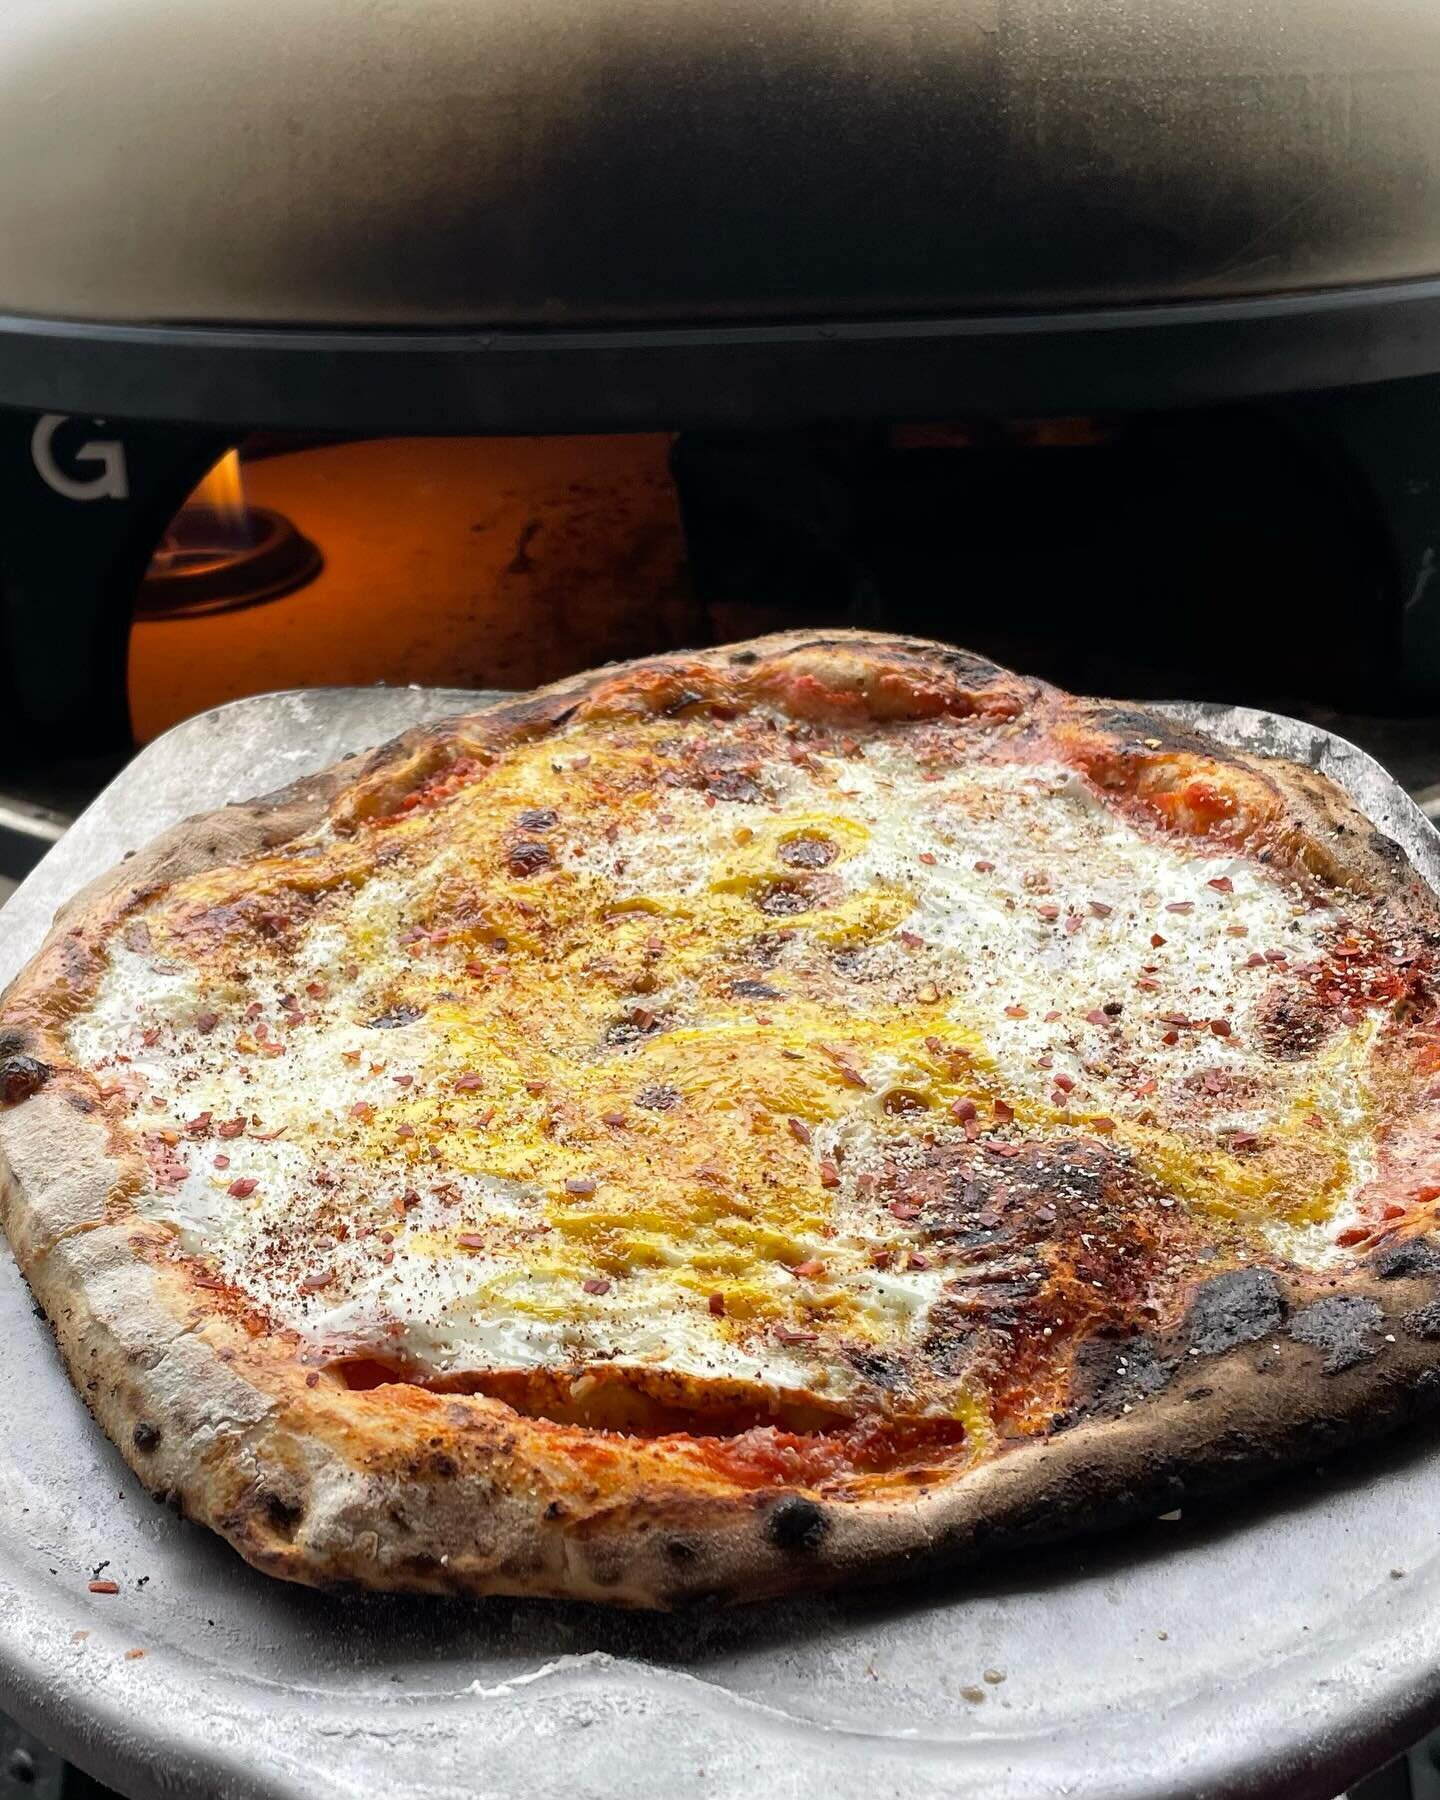 This week is the return of regular hours (8-12) at @farmersmarketatix @market_central and we will be back with fresh pizzas, frozen pizzas and microgreens. In addition to The Brekky and the Veggie Brekky we are going to have two more breakfast pizza 